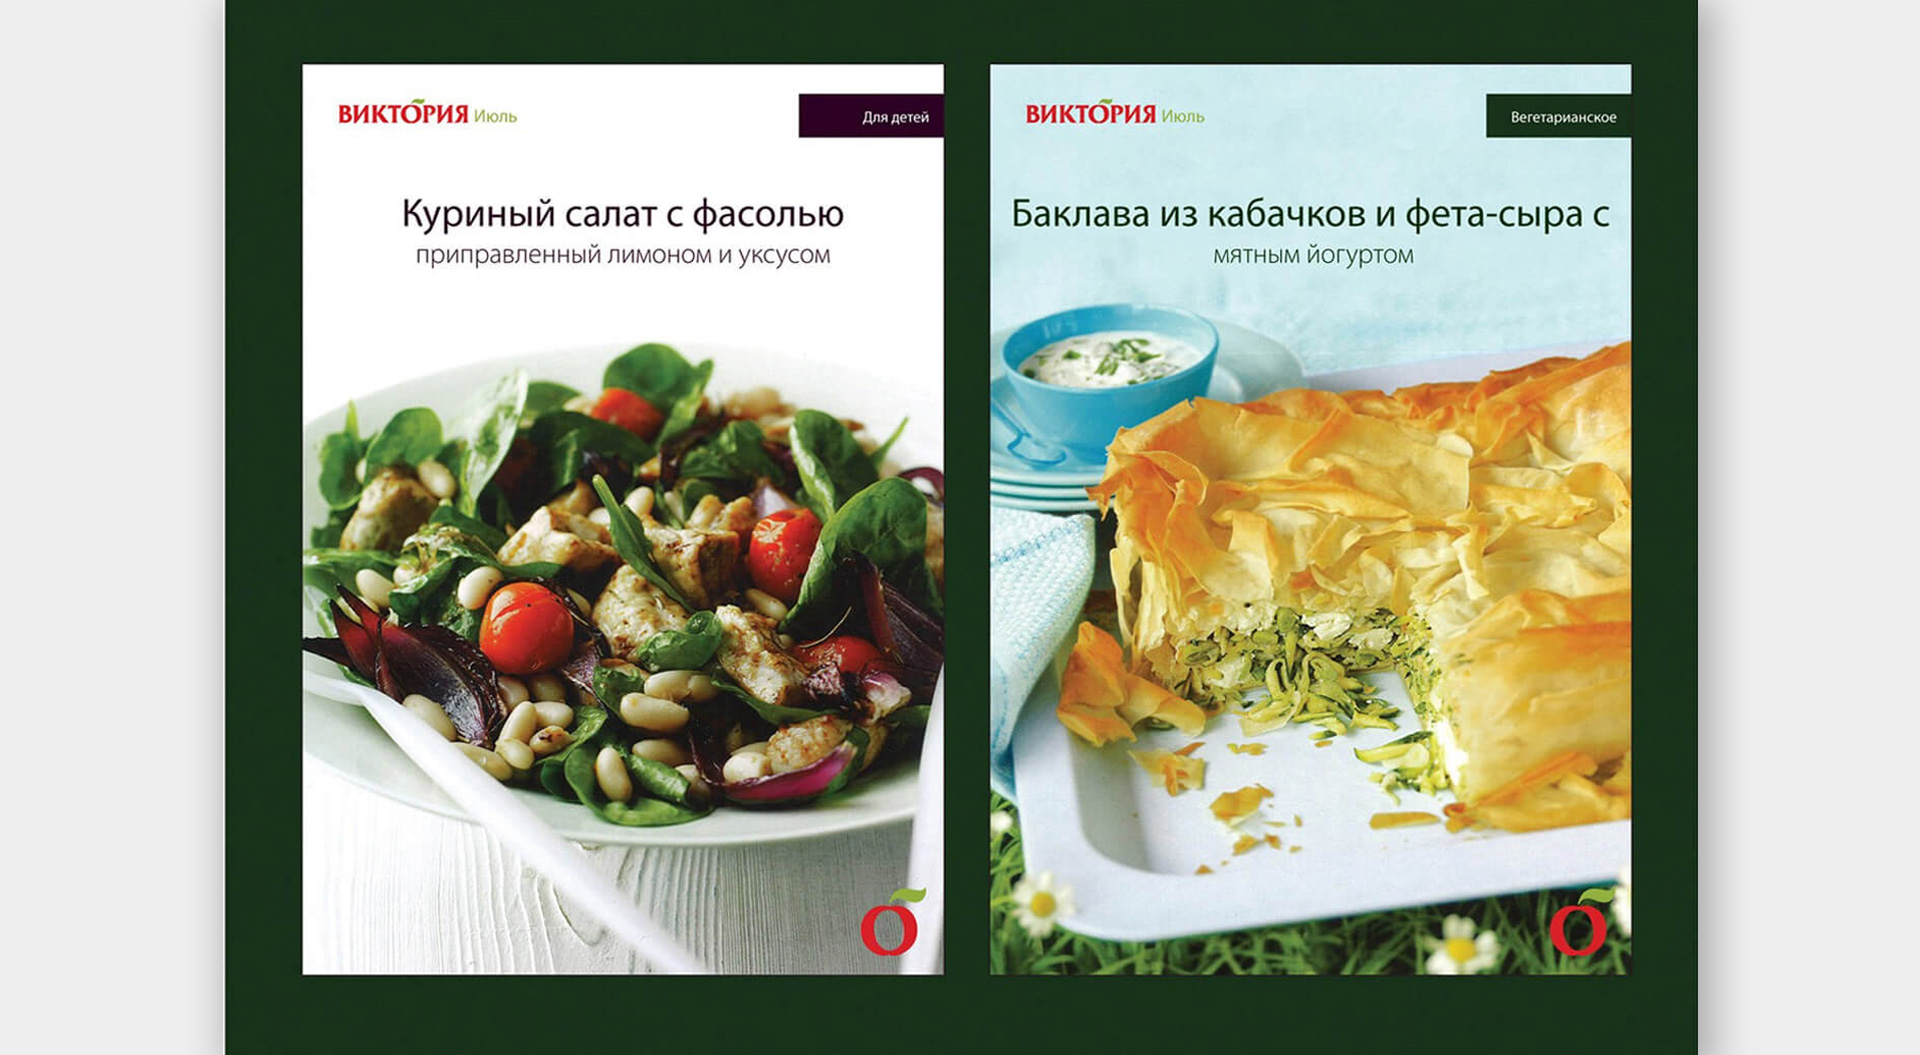 Victoria supermarkets Russia designing in-store catalogue and brand communications